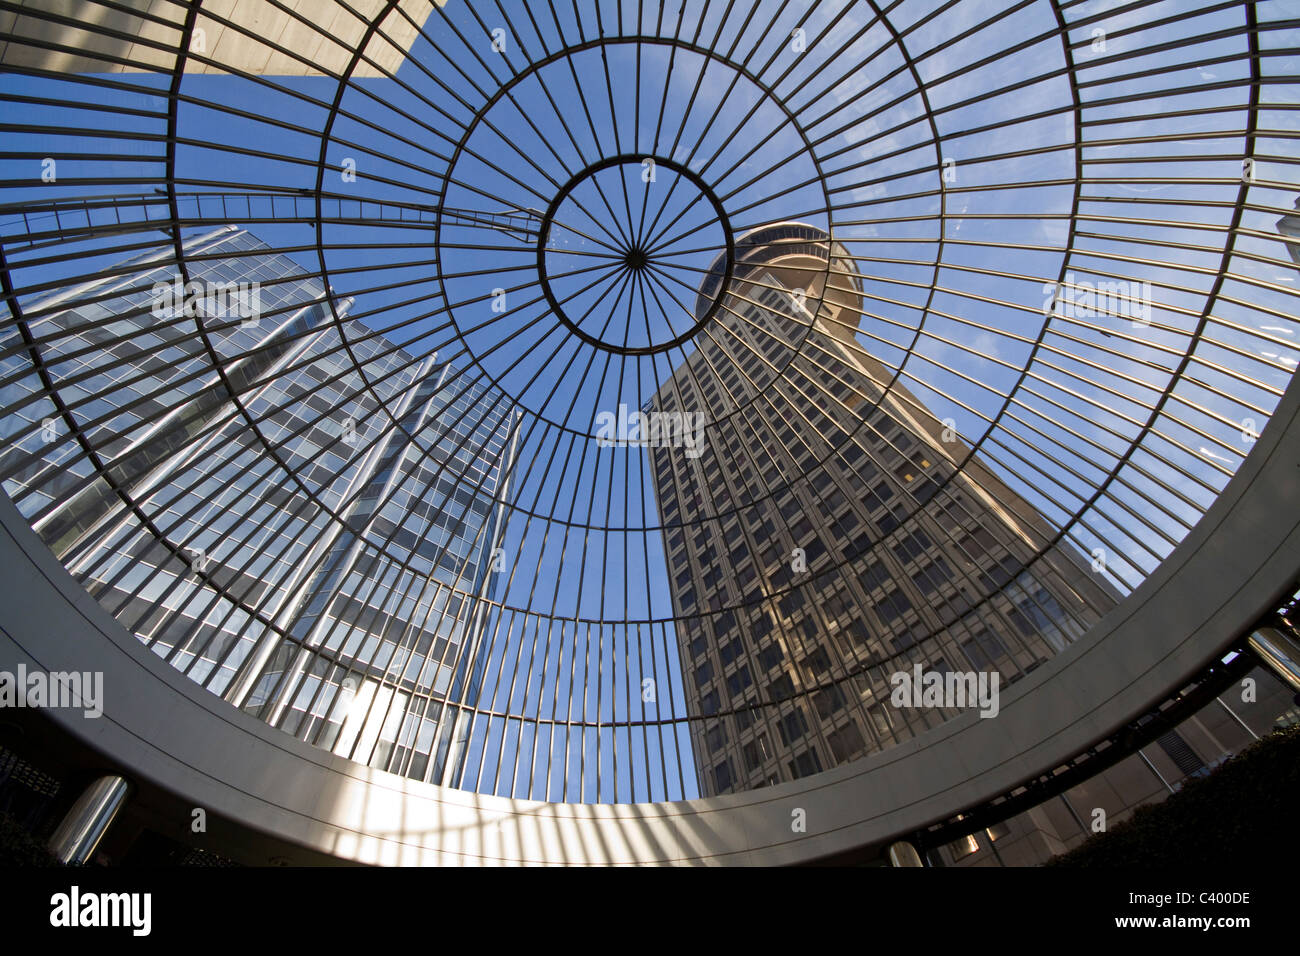 Looking up at Harbour Centre through glass domed roof, Vancouver, BC, Canada Stock Photo